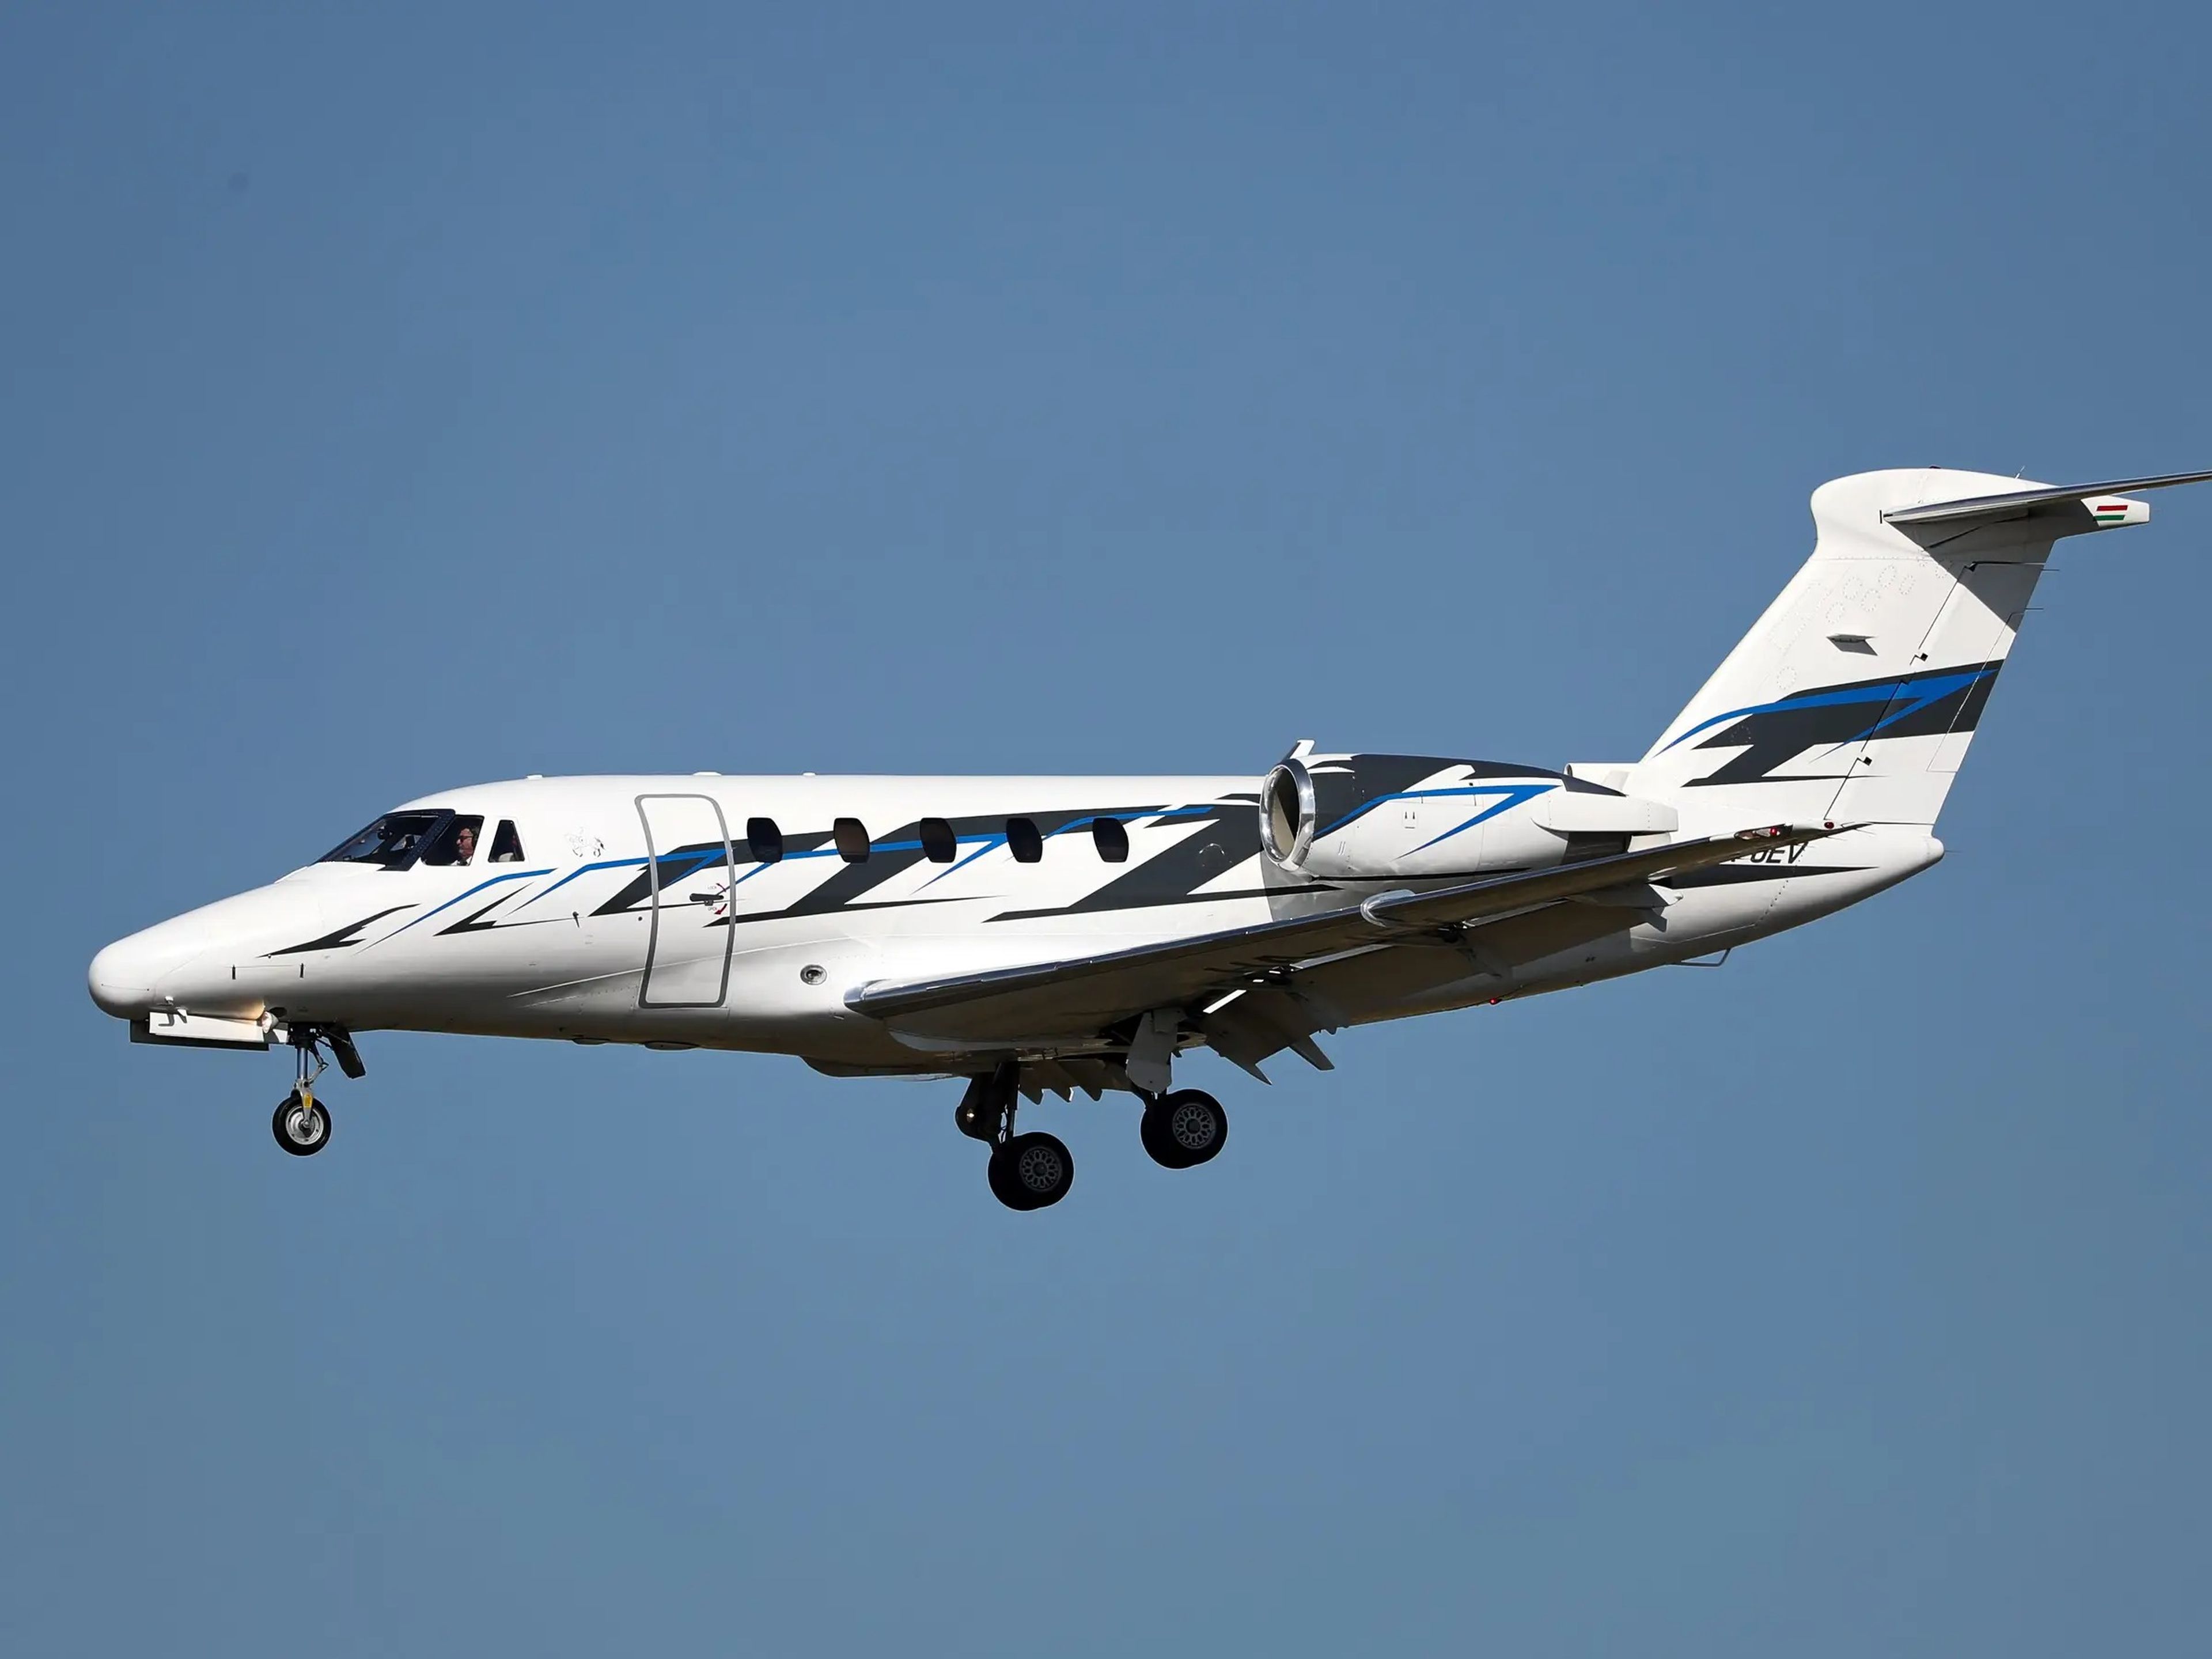 Georgia businessman Stephen Prince said he has decided to sell his Cessna 650 after realizing the environmental impact of private jet travel.